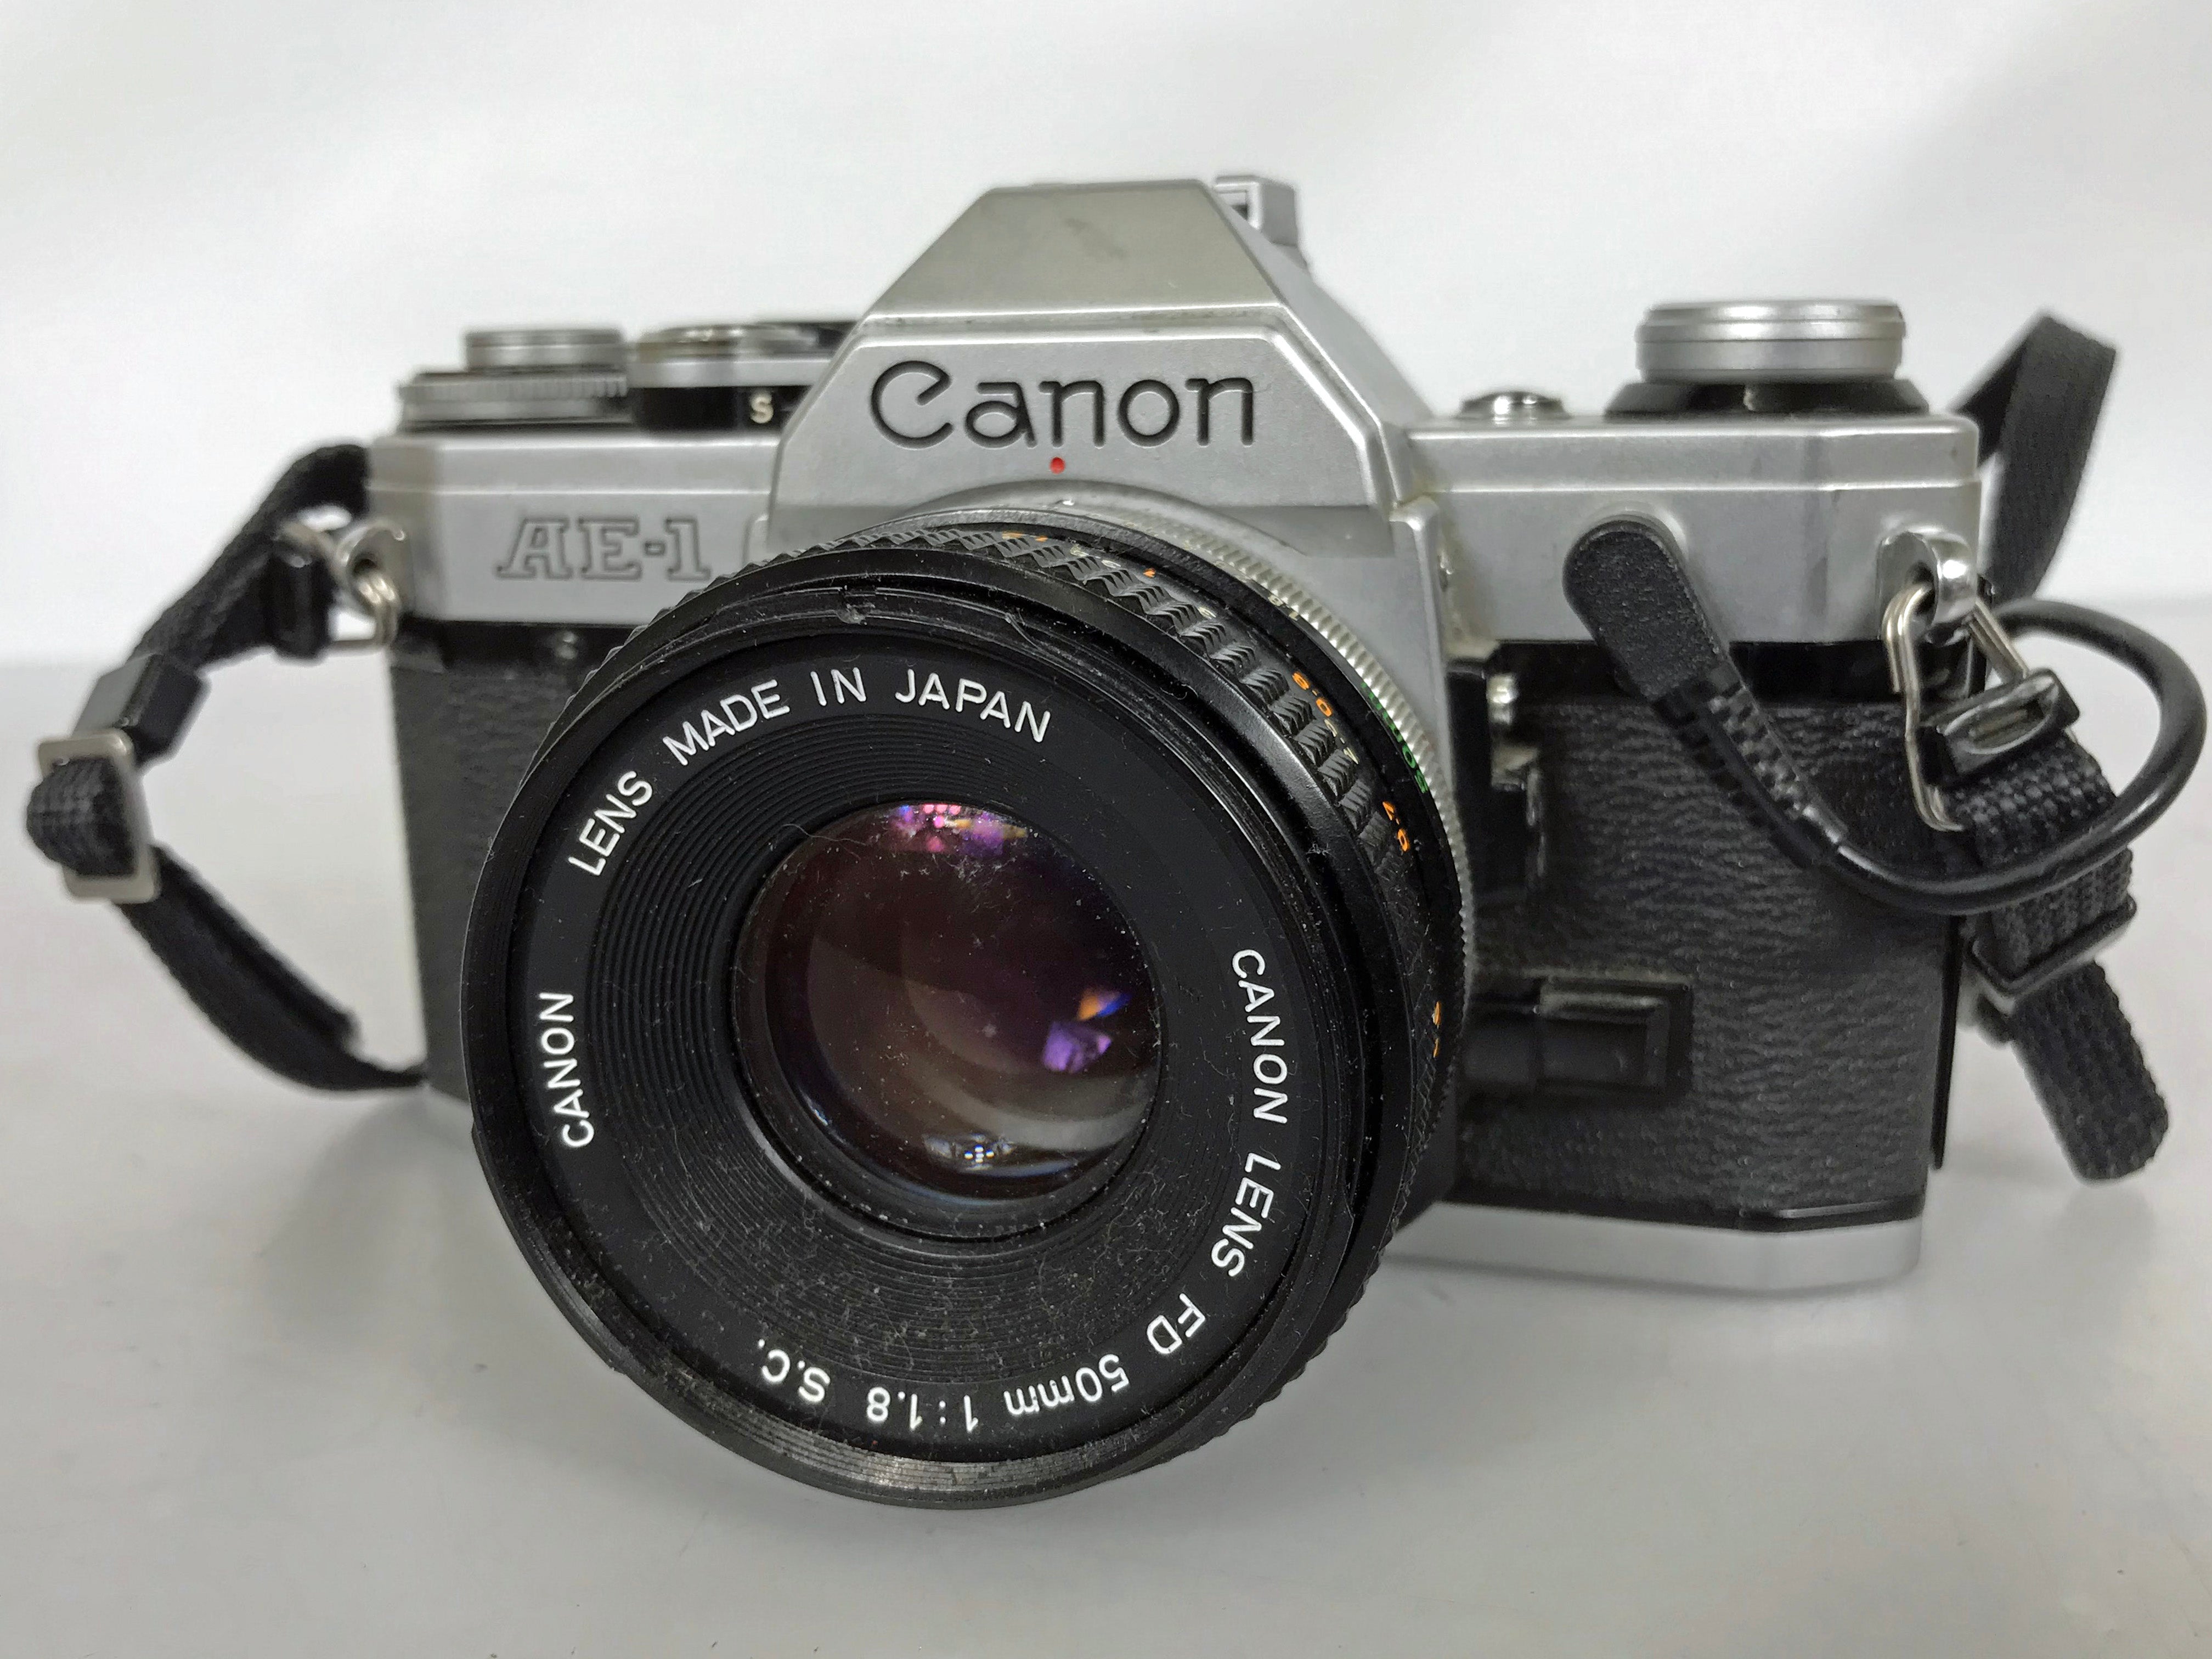 Canon AE-1 35mm SLR Manual Focus Camera (Chrome) with 50mm f/1.8